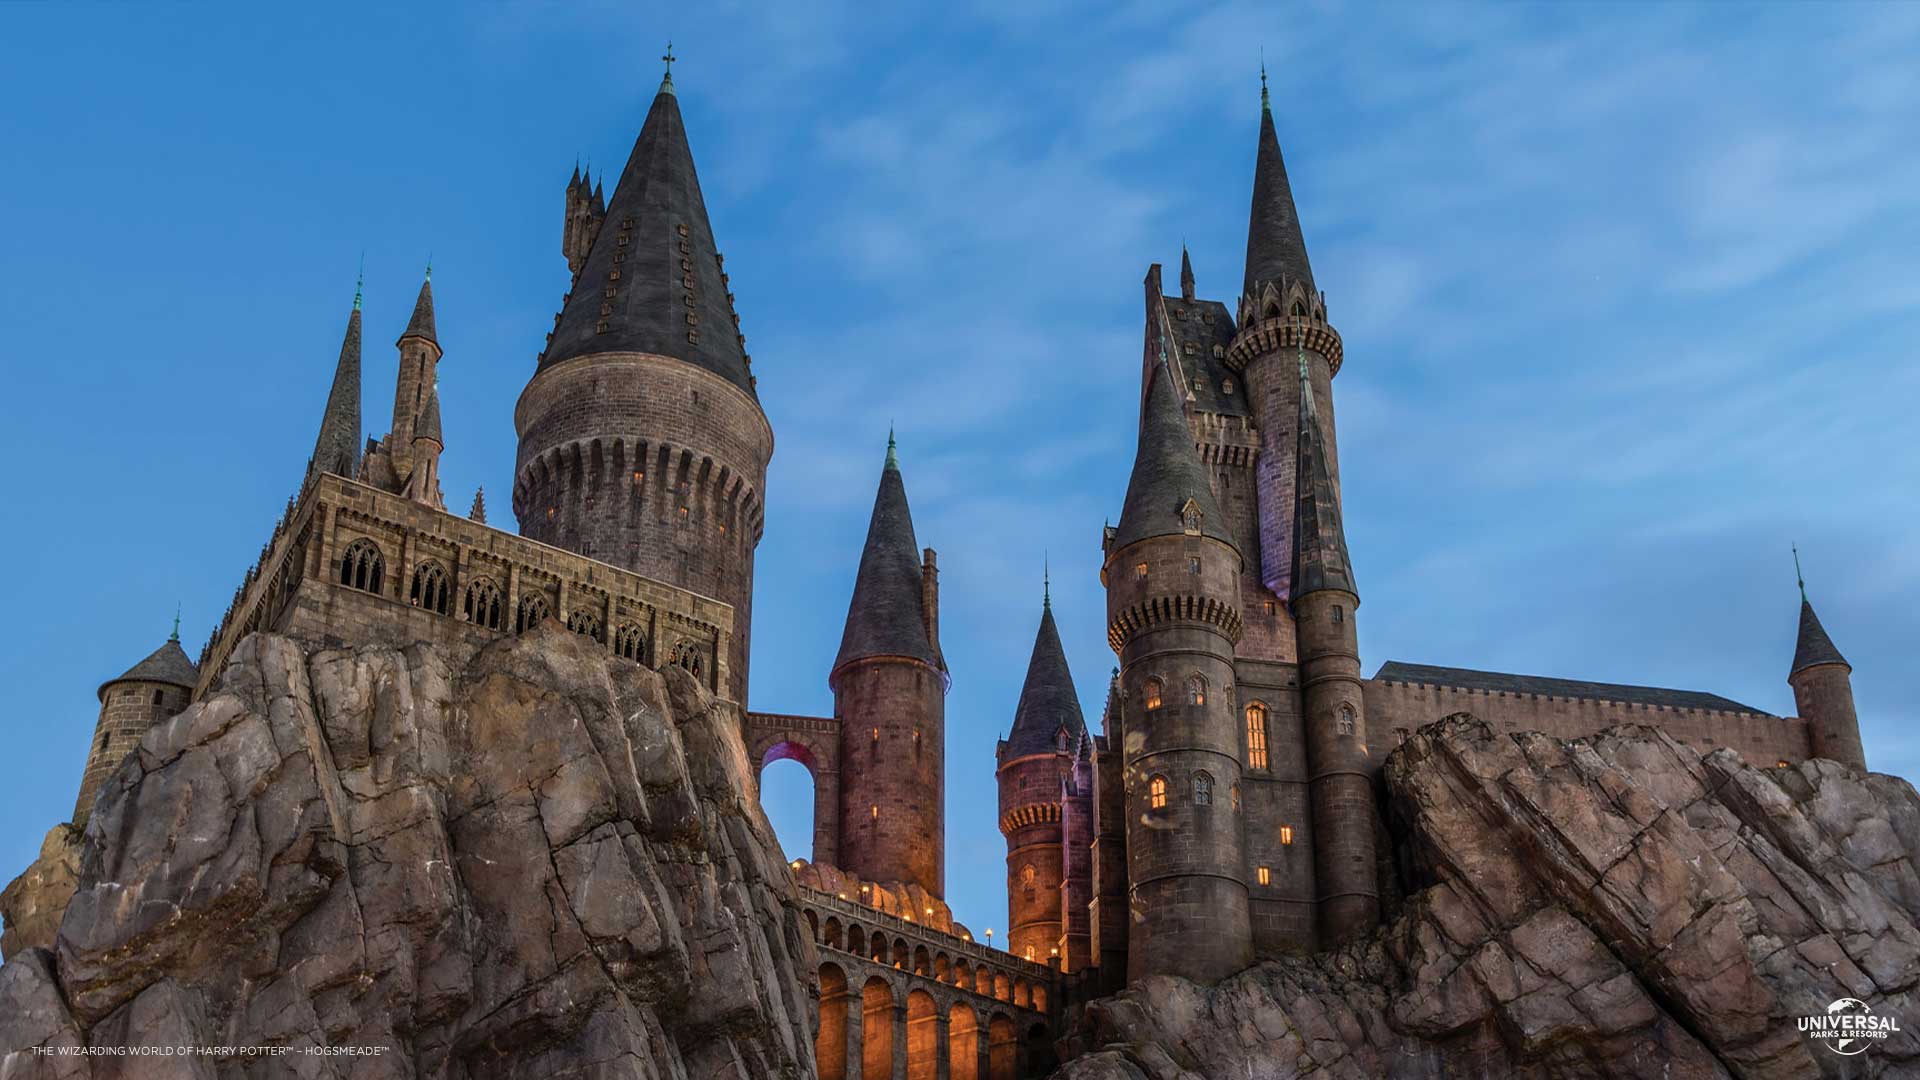 Try our new Harry Potter themed video call backgrounds